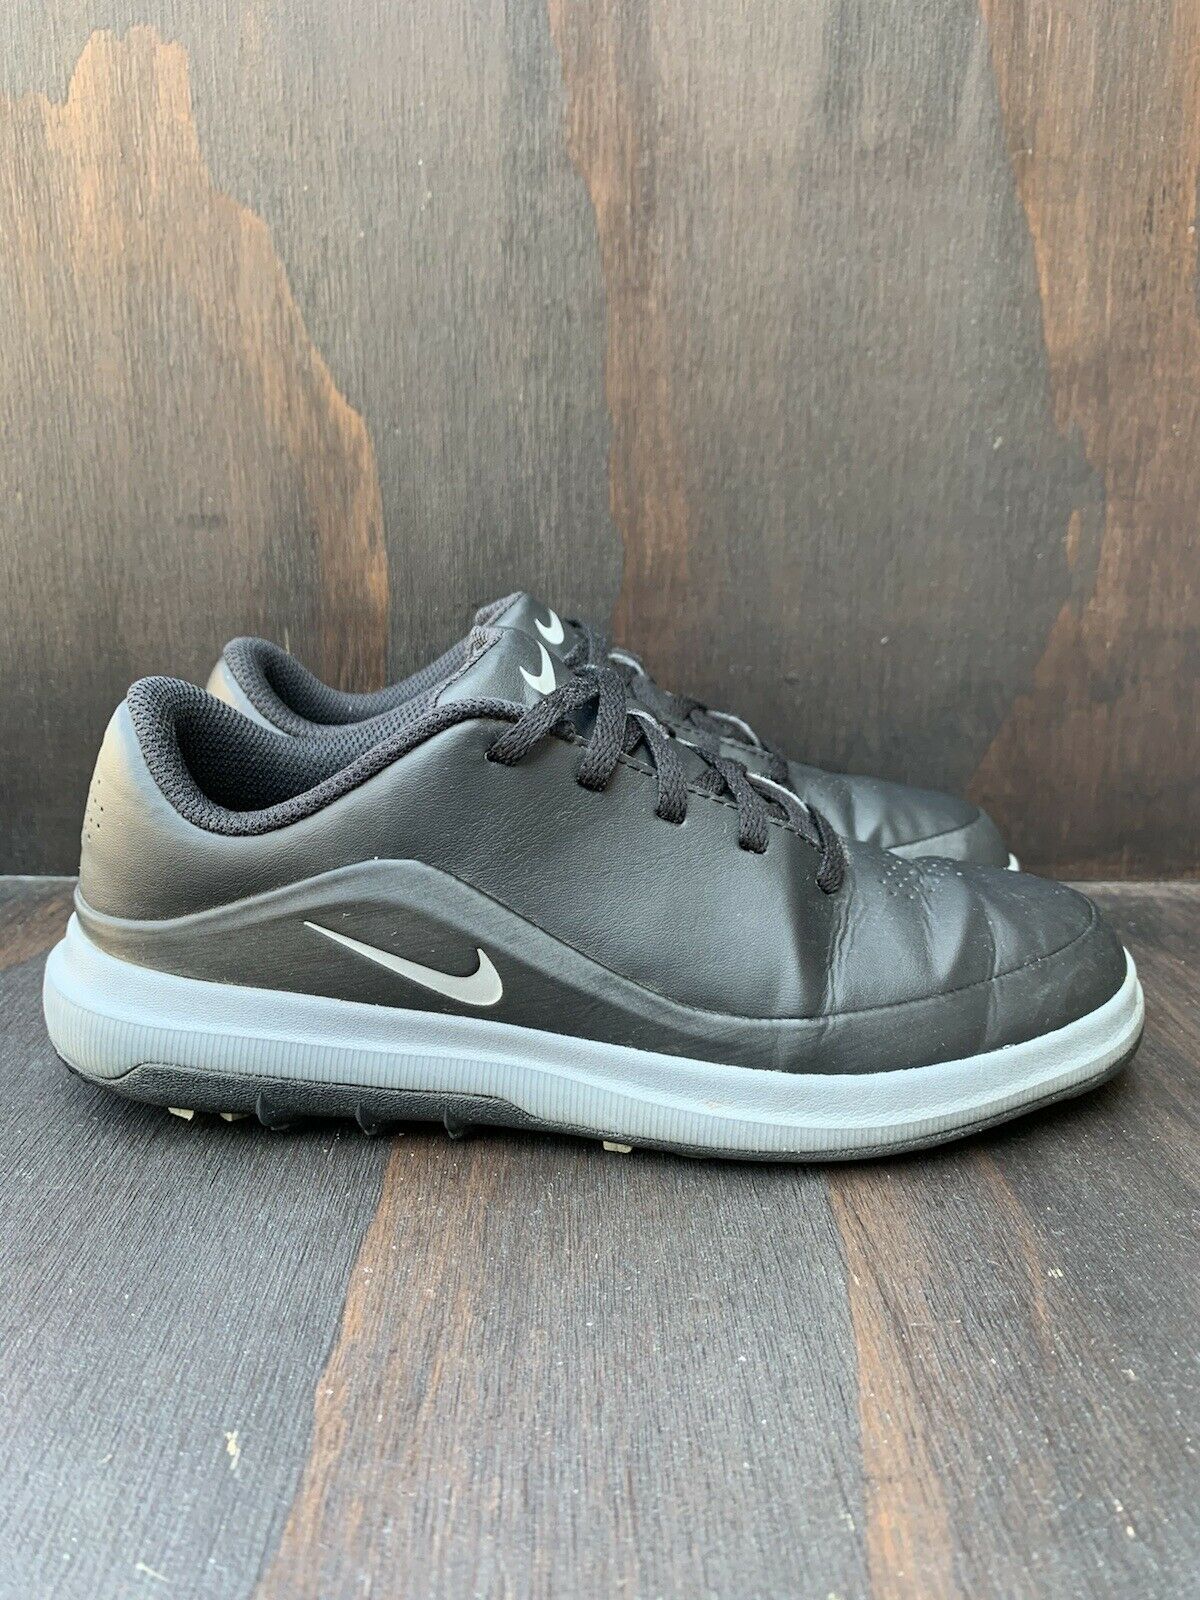 Kids Nike Precision Jr Golf Shoes Soft Spikes Youth Size 4Y 909251 002